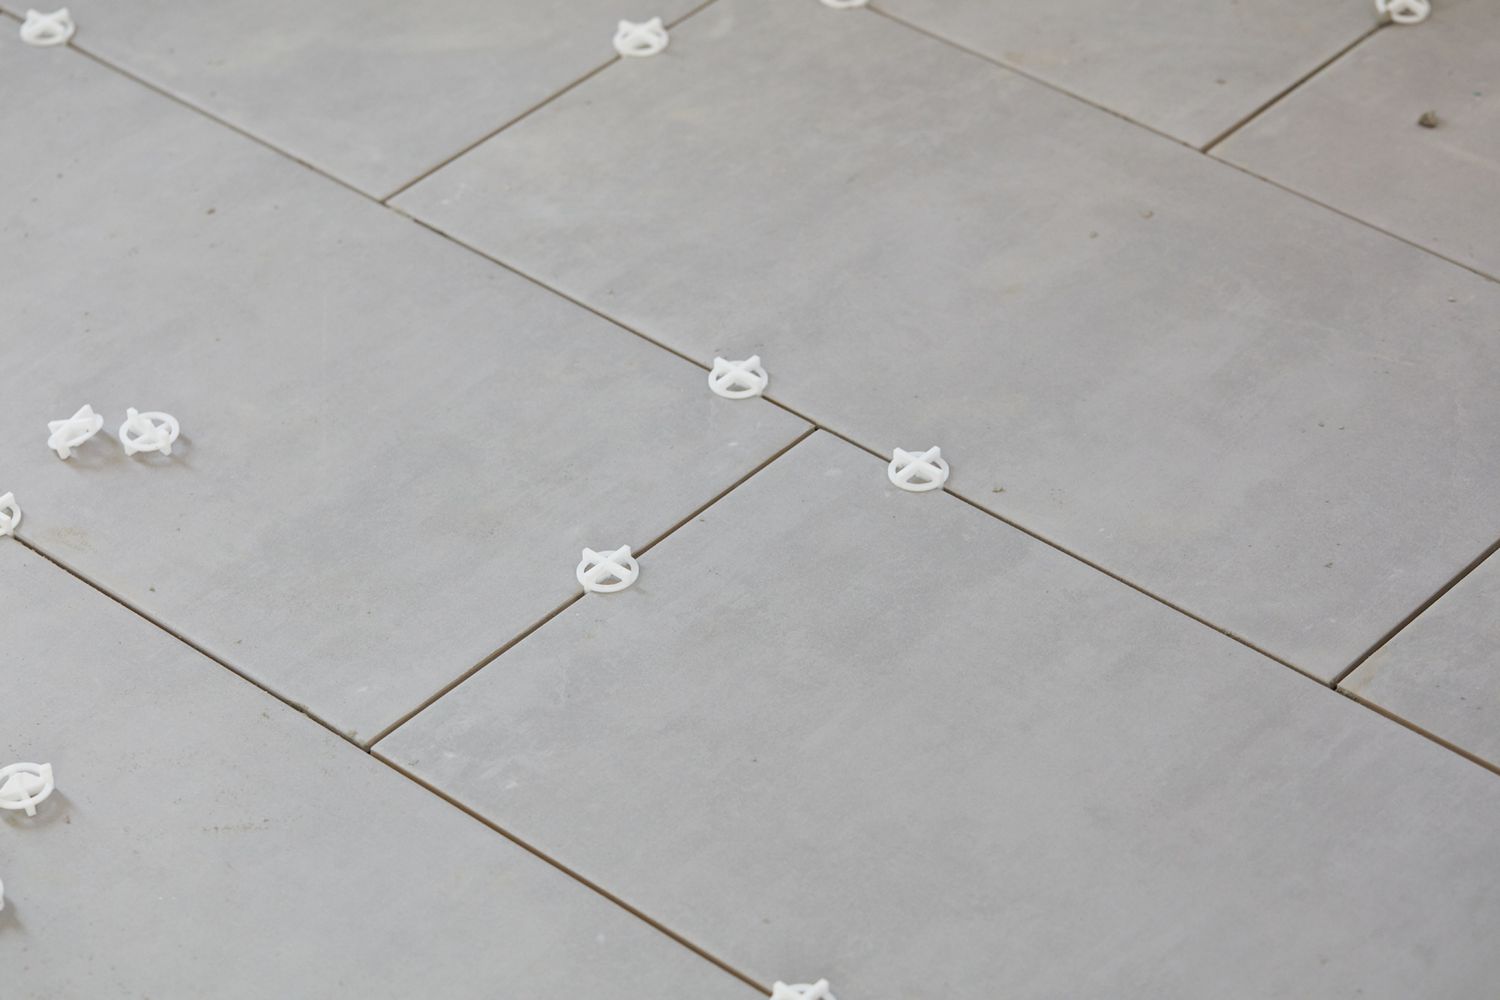 Chosen tile pieces with white spacers in between